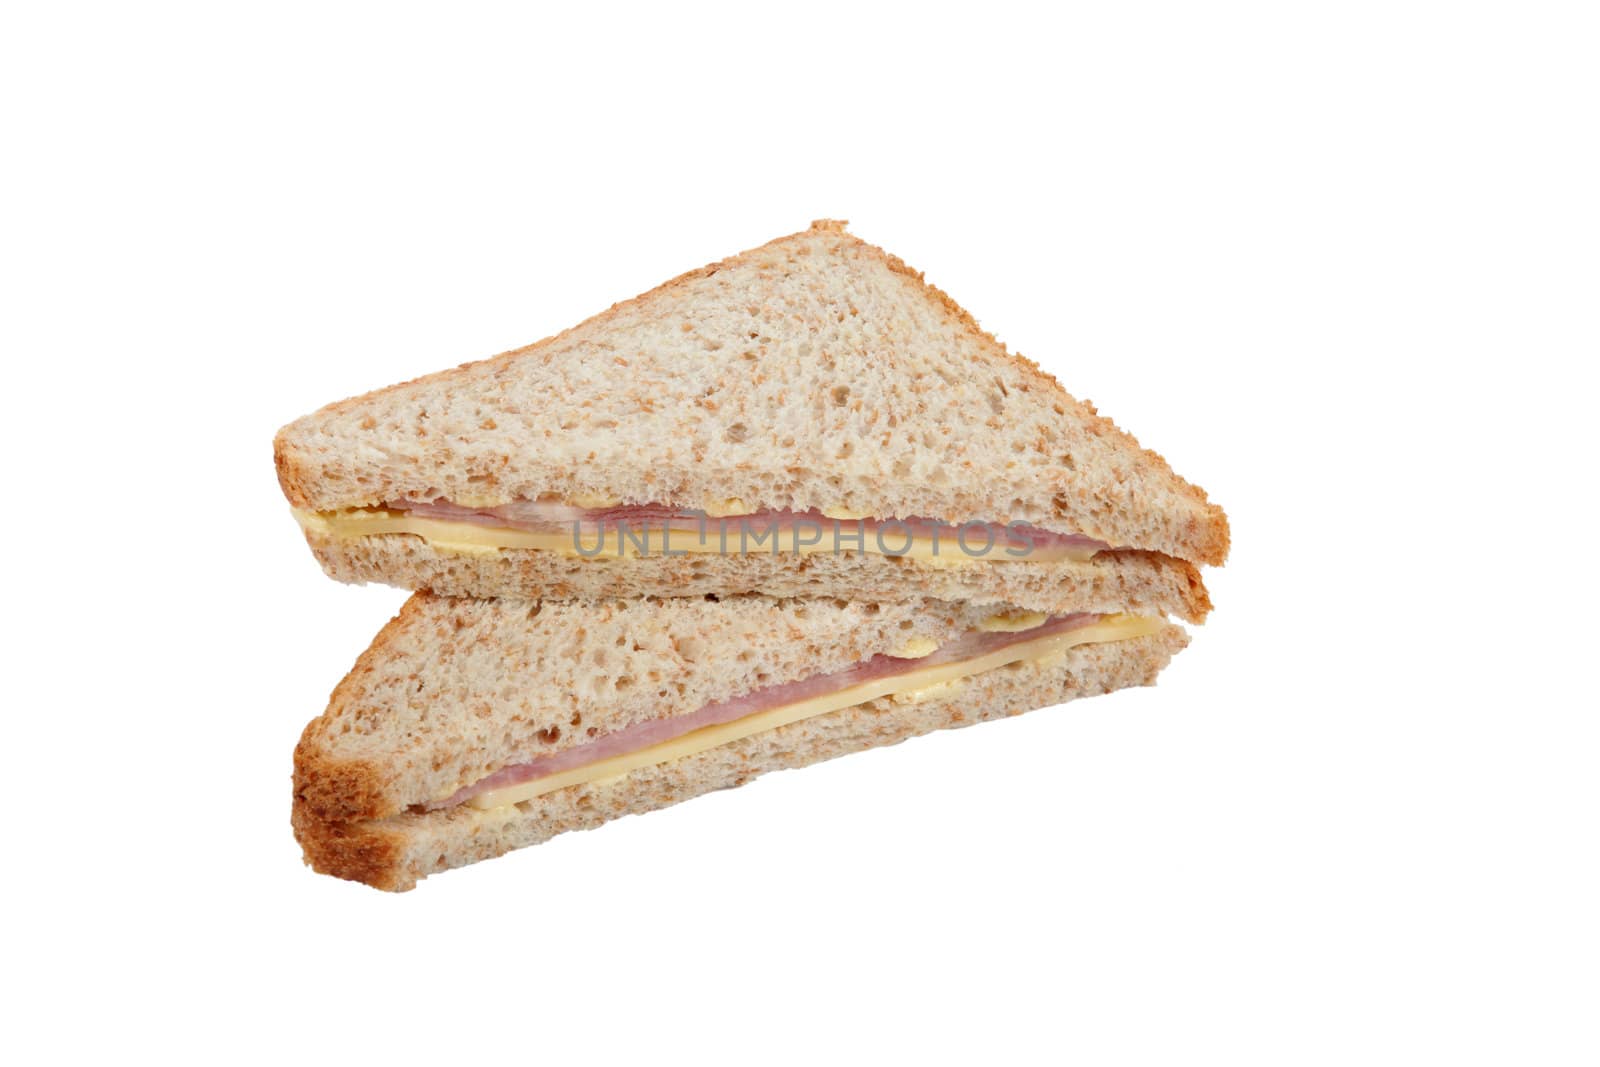 Two halves of a ham sandwich on brown bread by phovoir